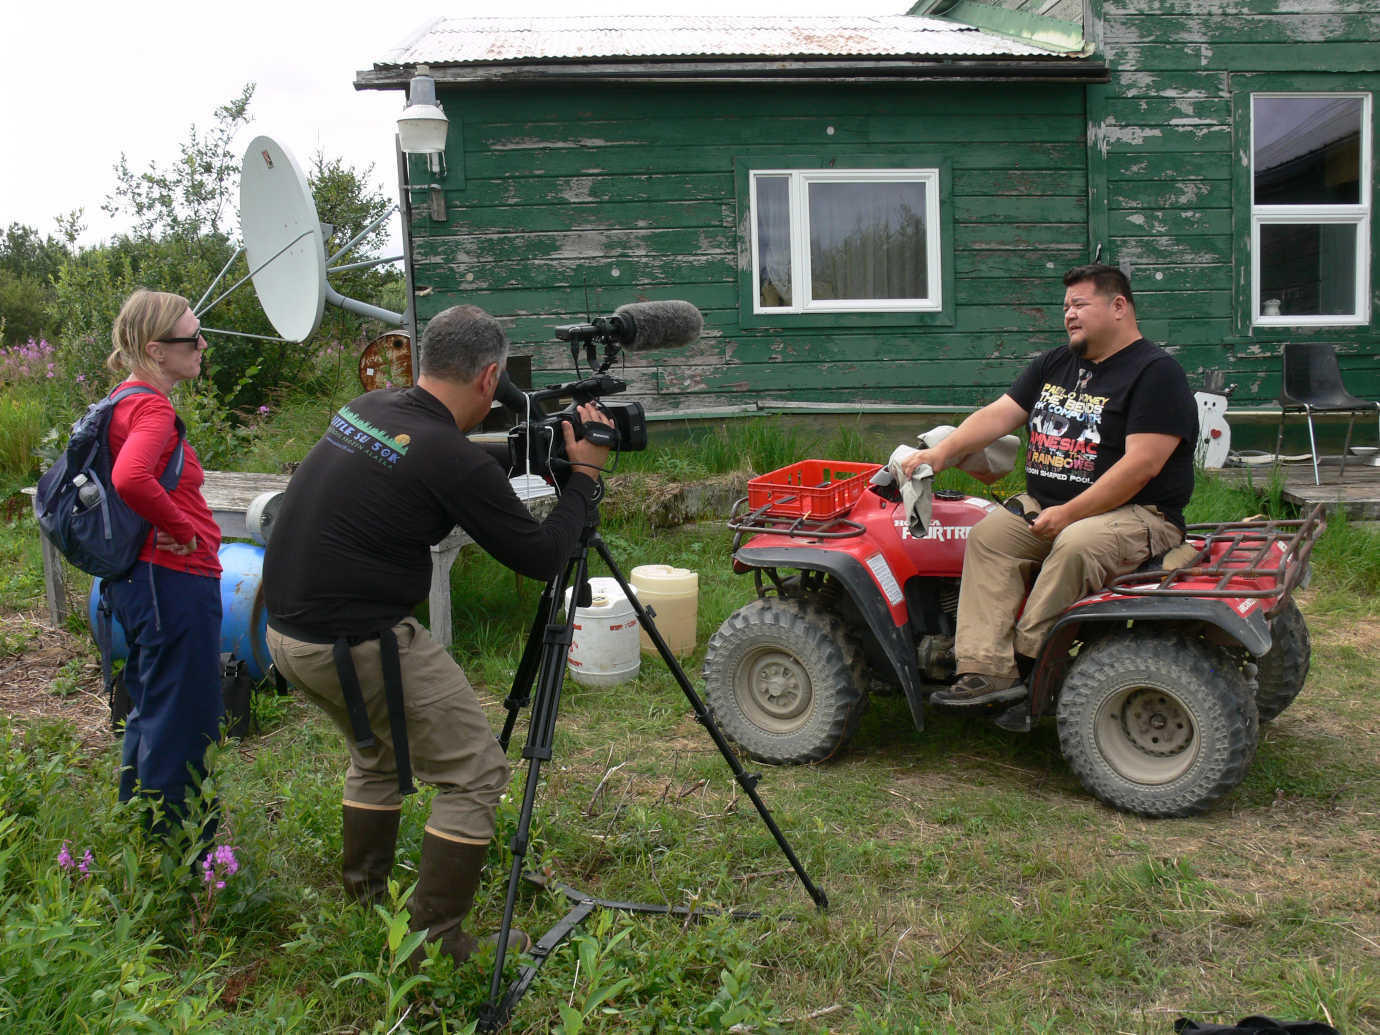 Ringsmuth (left) interviews former village resident Brad Angasan (sitting on four-wheeler) while Scott Jensen, of Jensen Hall Creative, films the interview for a short documentary for the exhibition that presents the story of cannery life from the local perspective, entitled, *The Cannery Caretakers*. Image courtesy of the NN Cannery History Project.